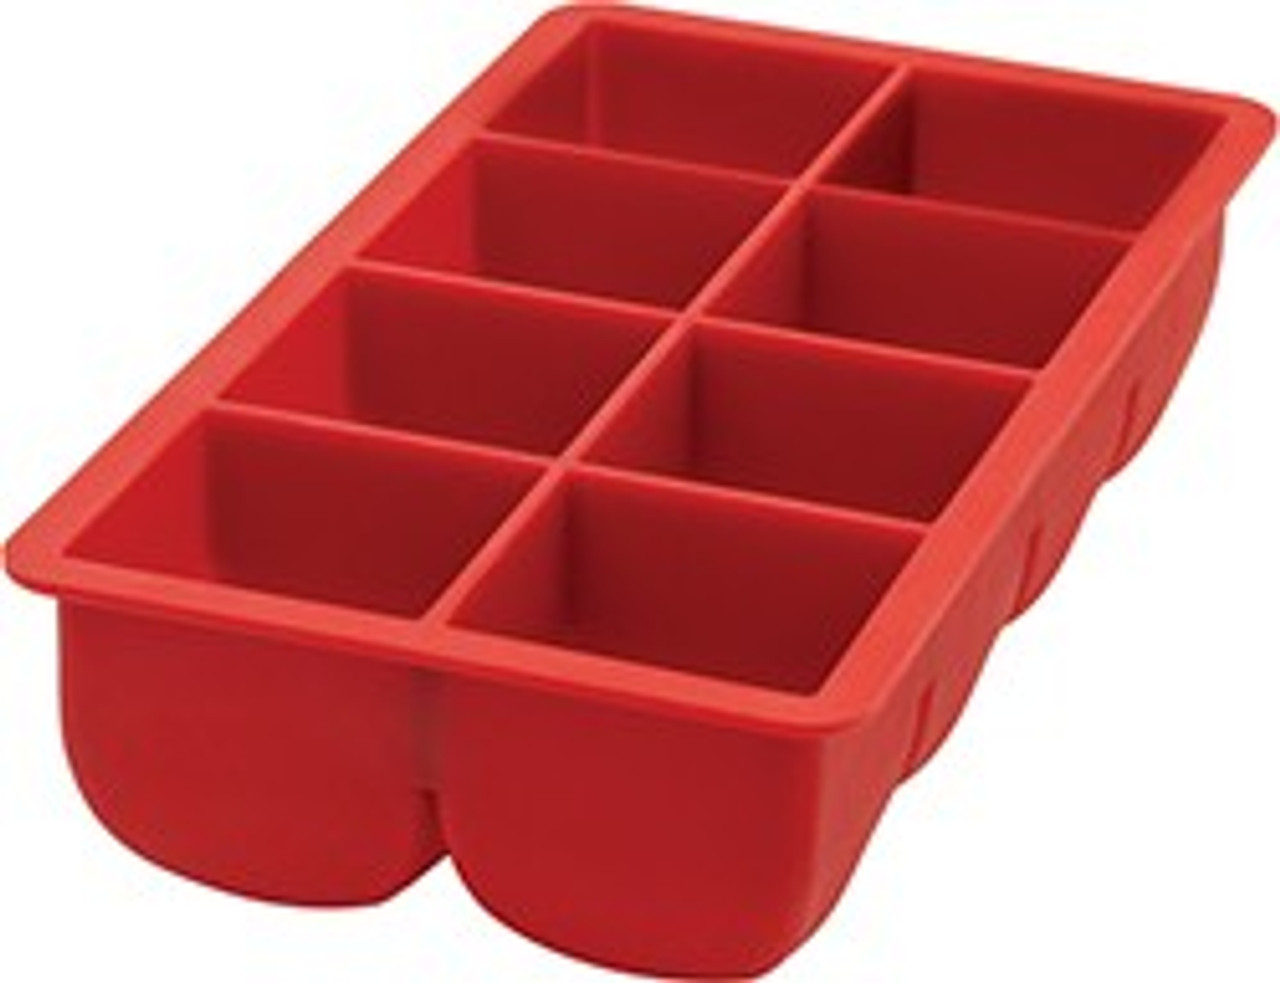 Silicone Square Block Silicone Cocktail Ice Cube Mold Tray Red 1 Blocks